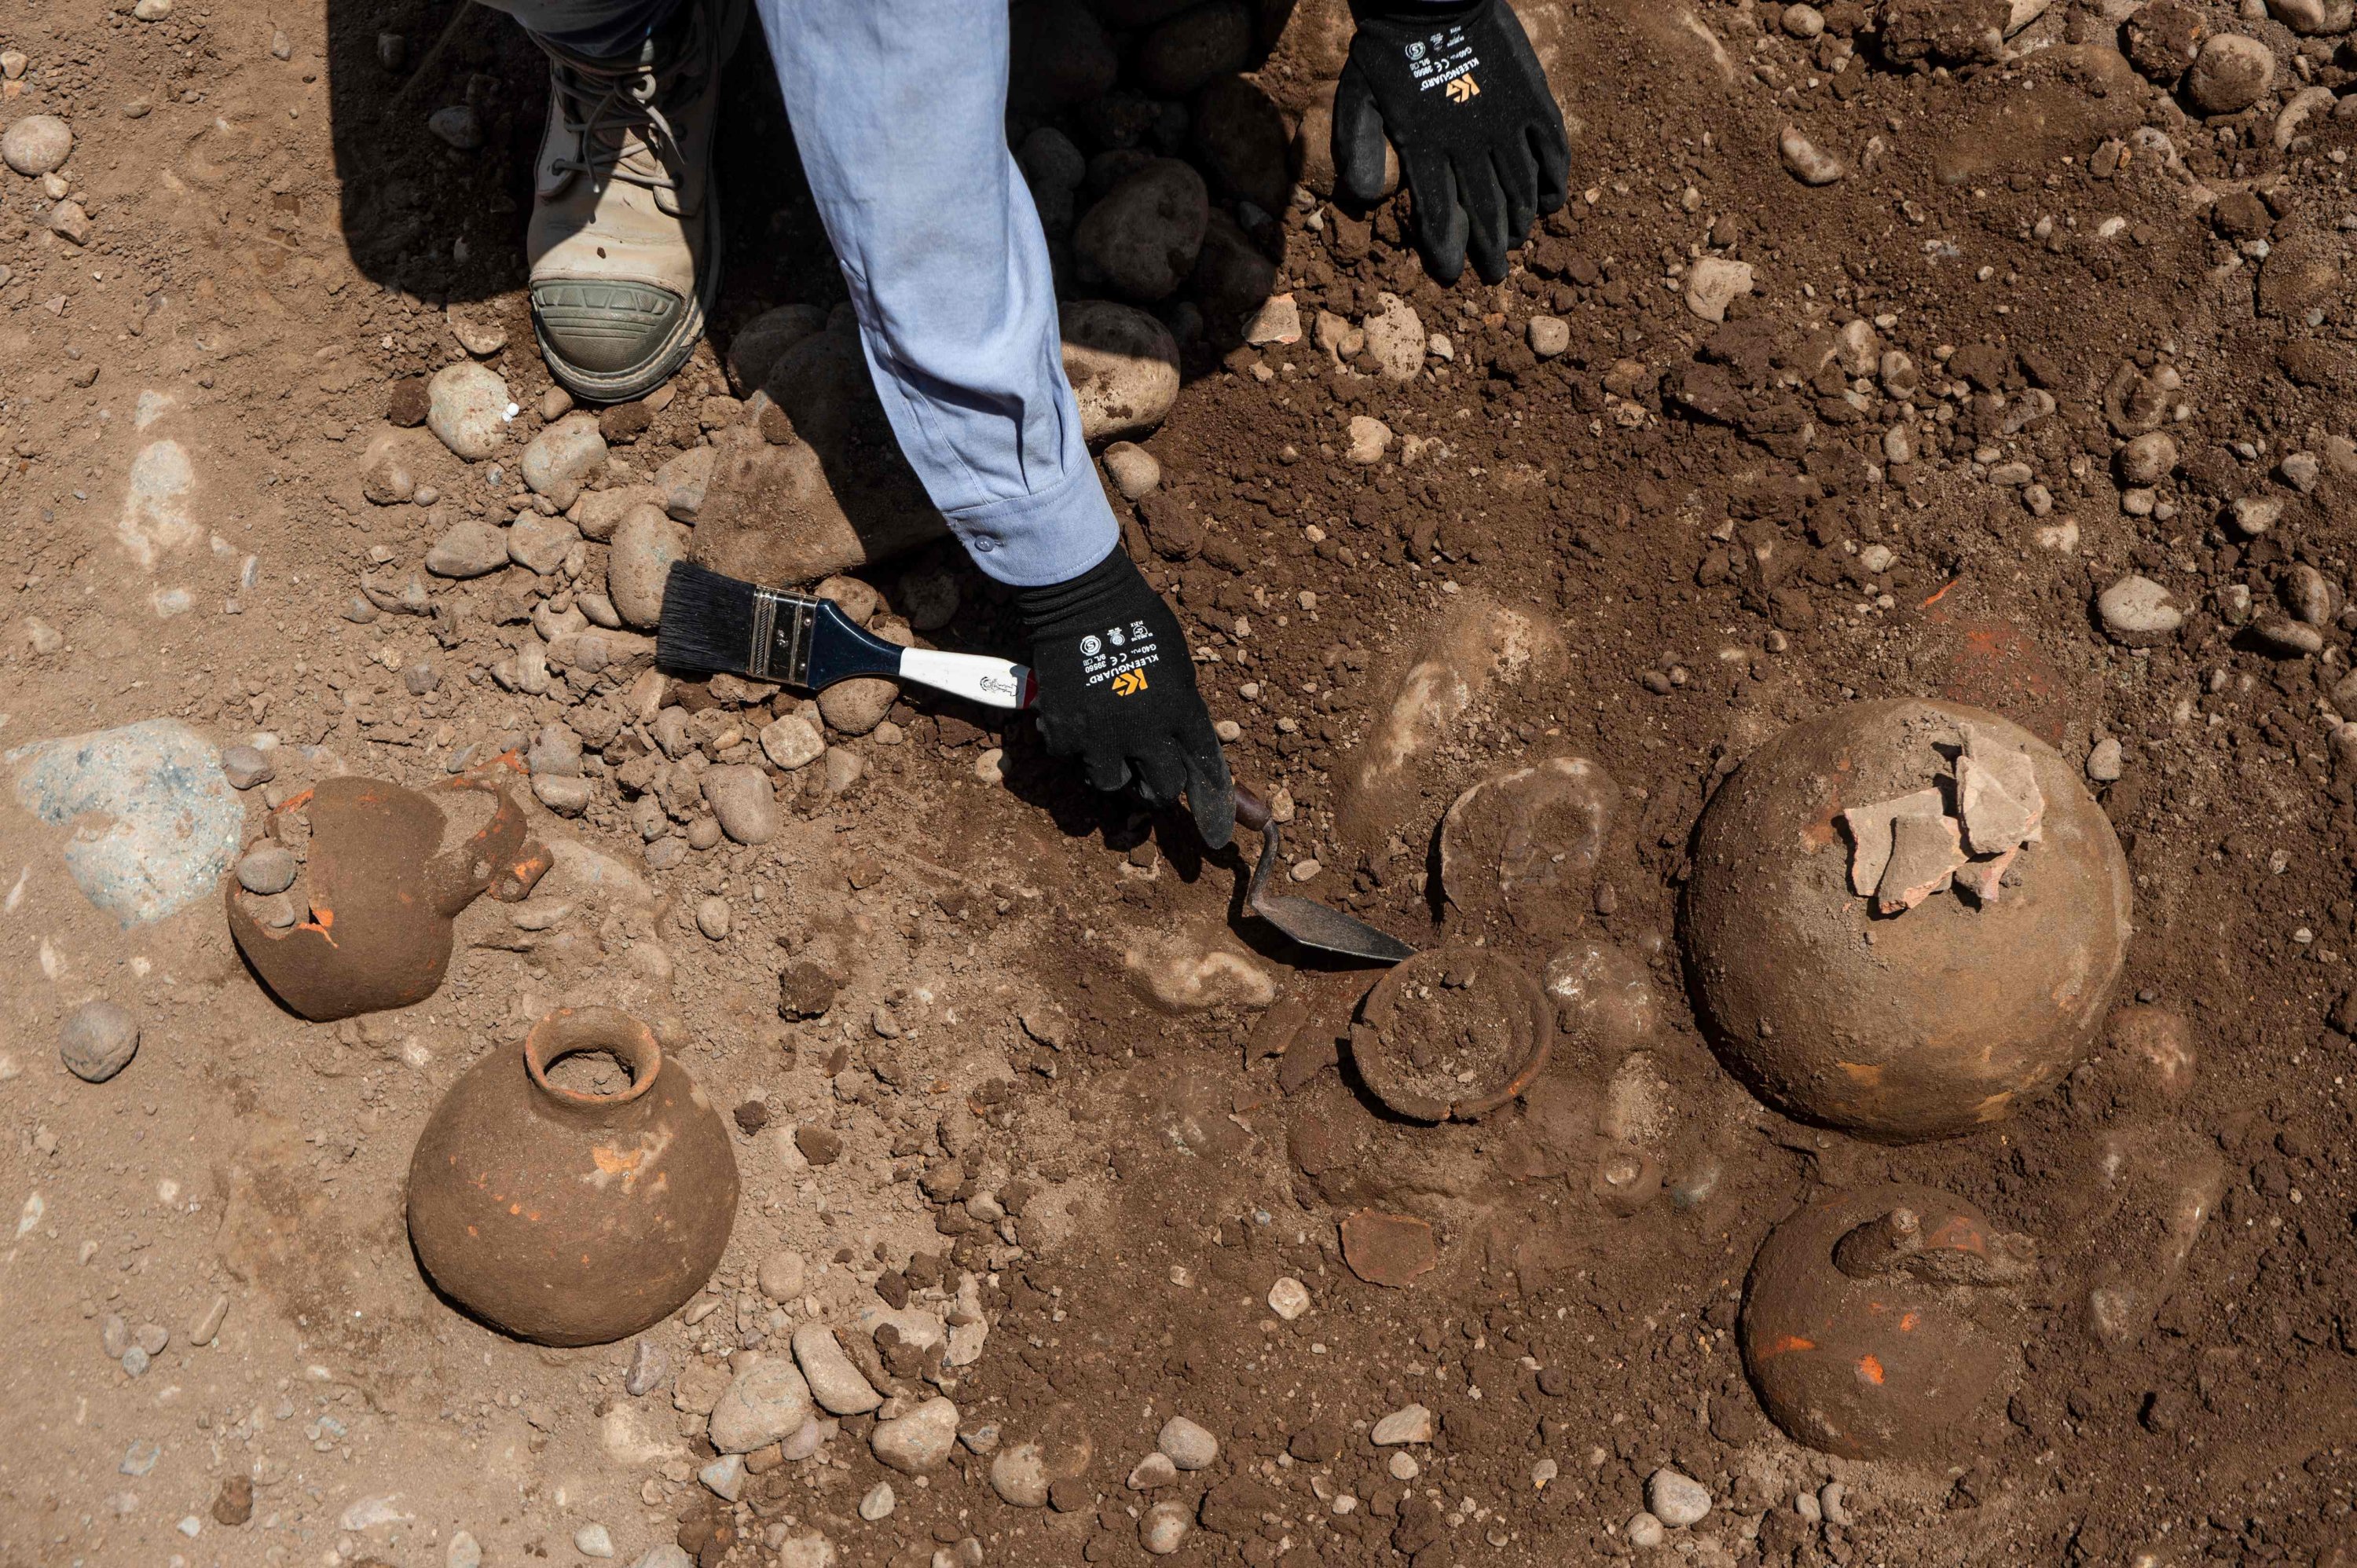 Specialists work around ancient vessels found by a crew laying a natural gas pipe under a street in Lima, Peru, Nov. 4, 2021. (AFP Photo)